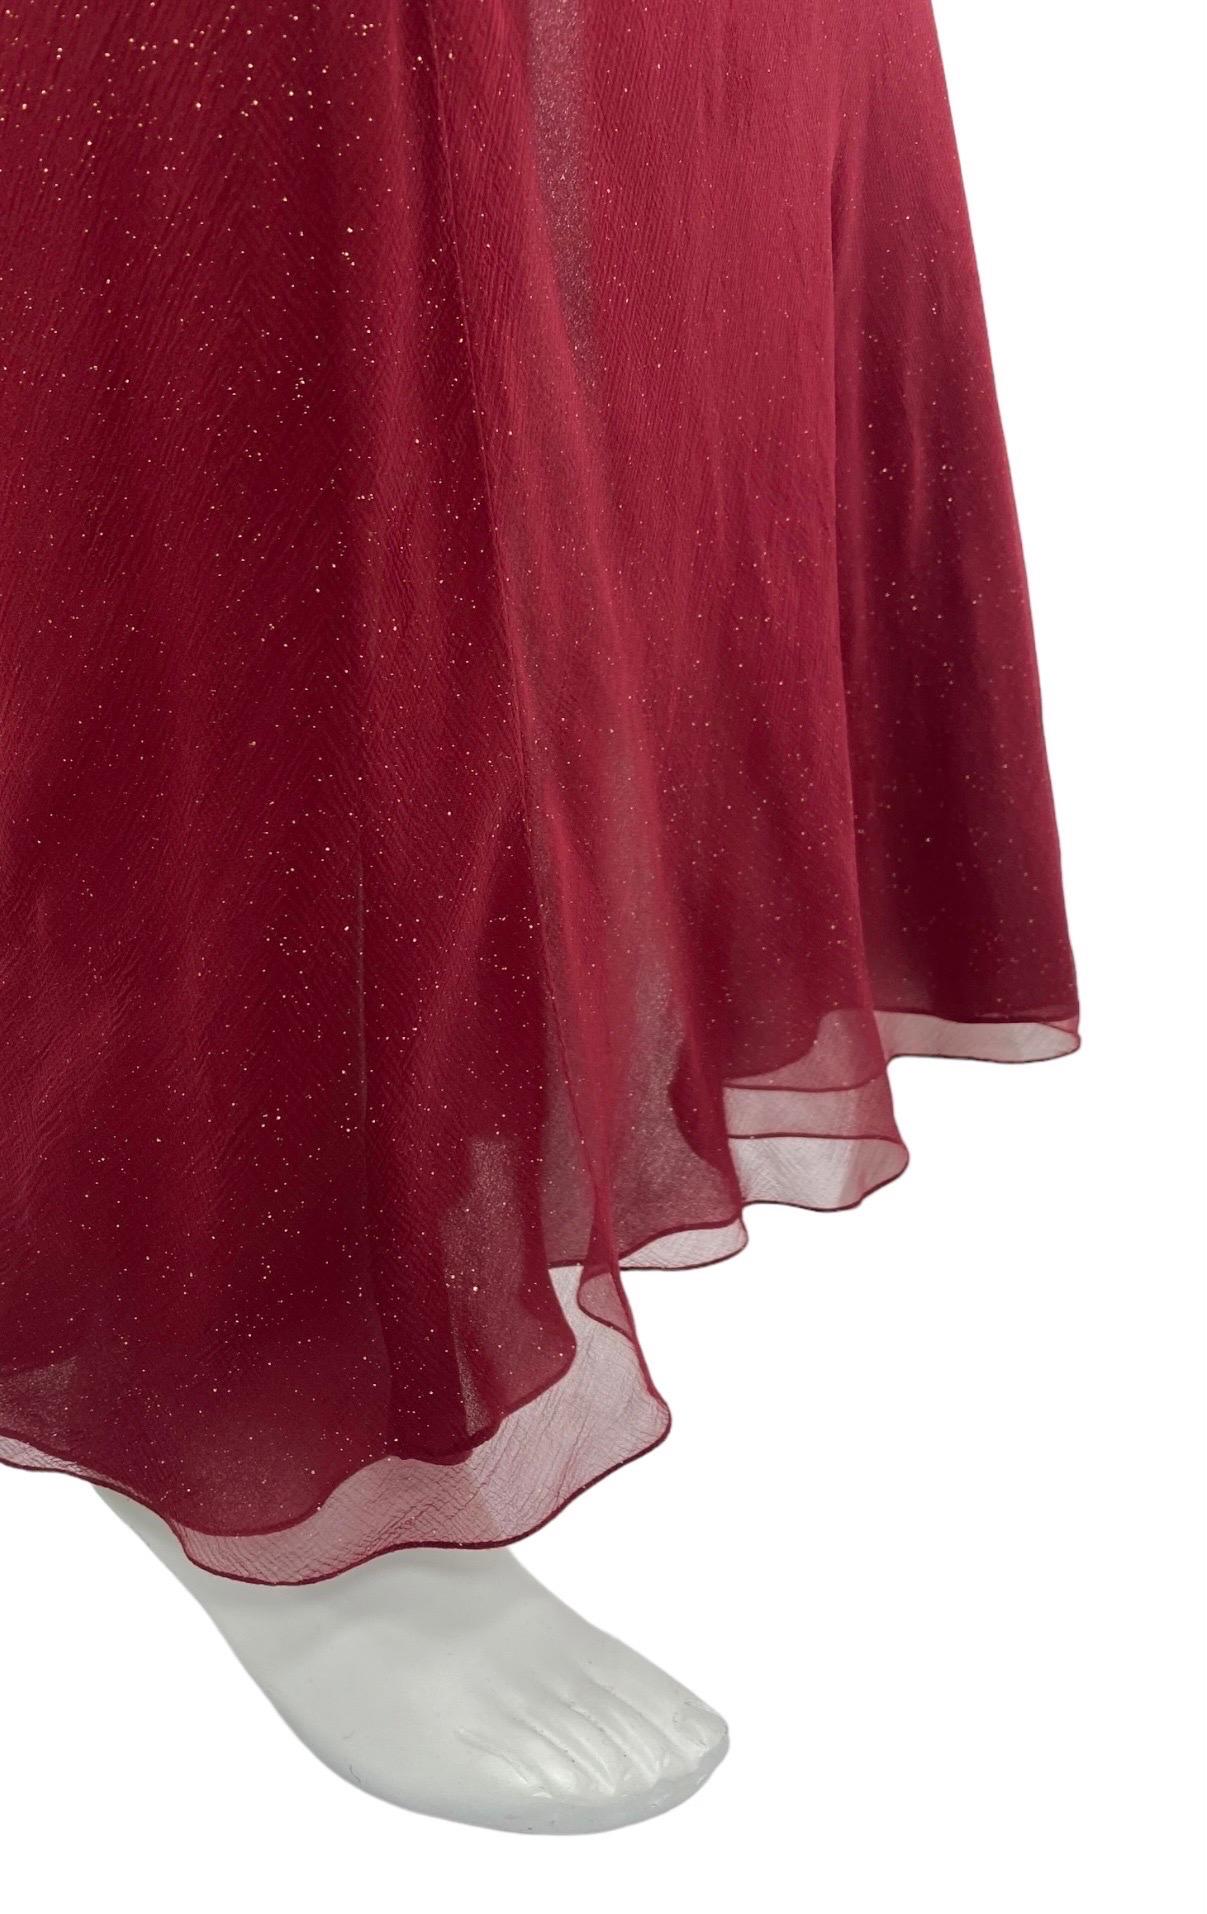 Women's Vintage John Galliano for Christian Dior Gold Dusted Red Silk Long Skirt Size 6 For Sale